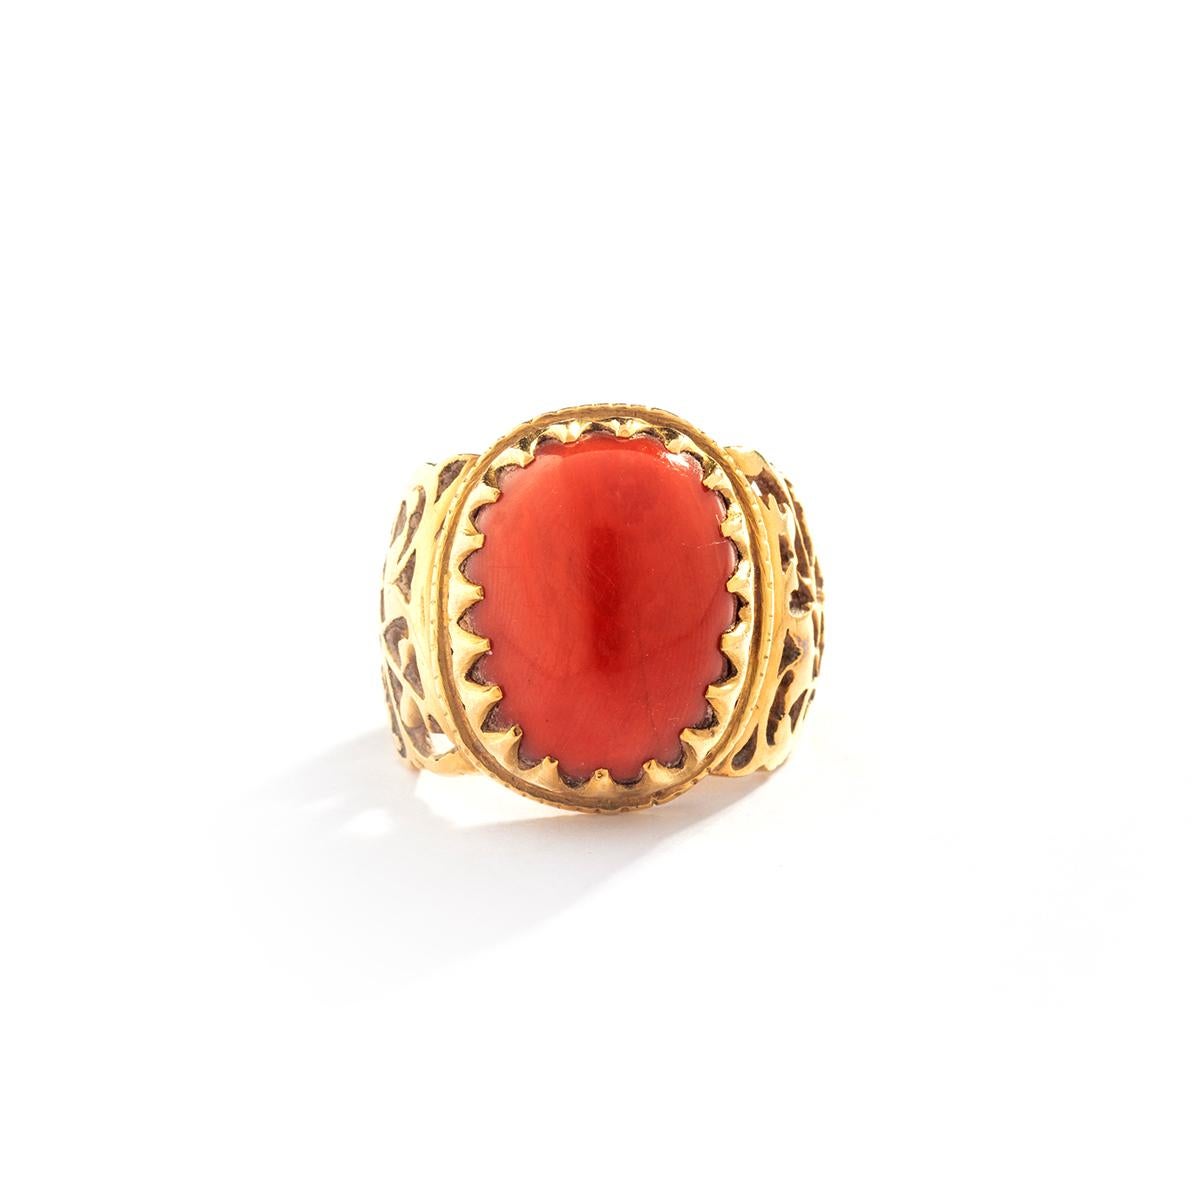 Antique Etruscan Revival yellow Gold 18k Ring centered by a cabochon coral.
Early 20th Century.

Ring size: 6.